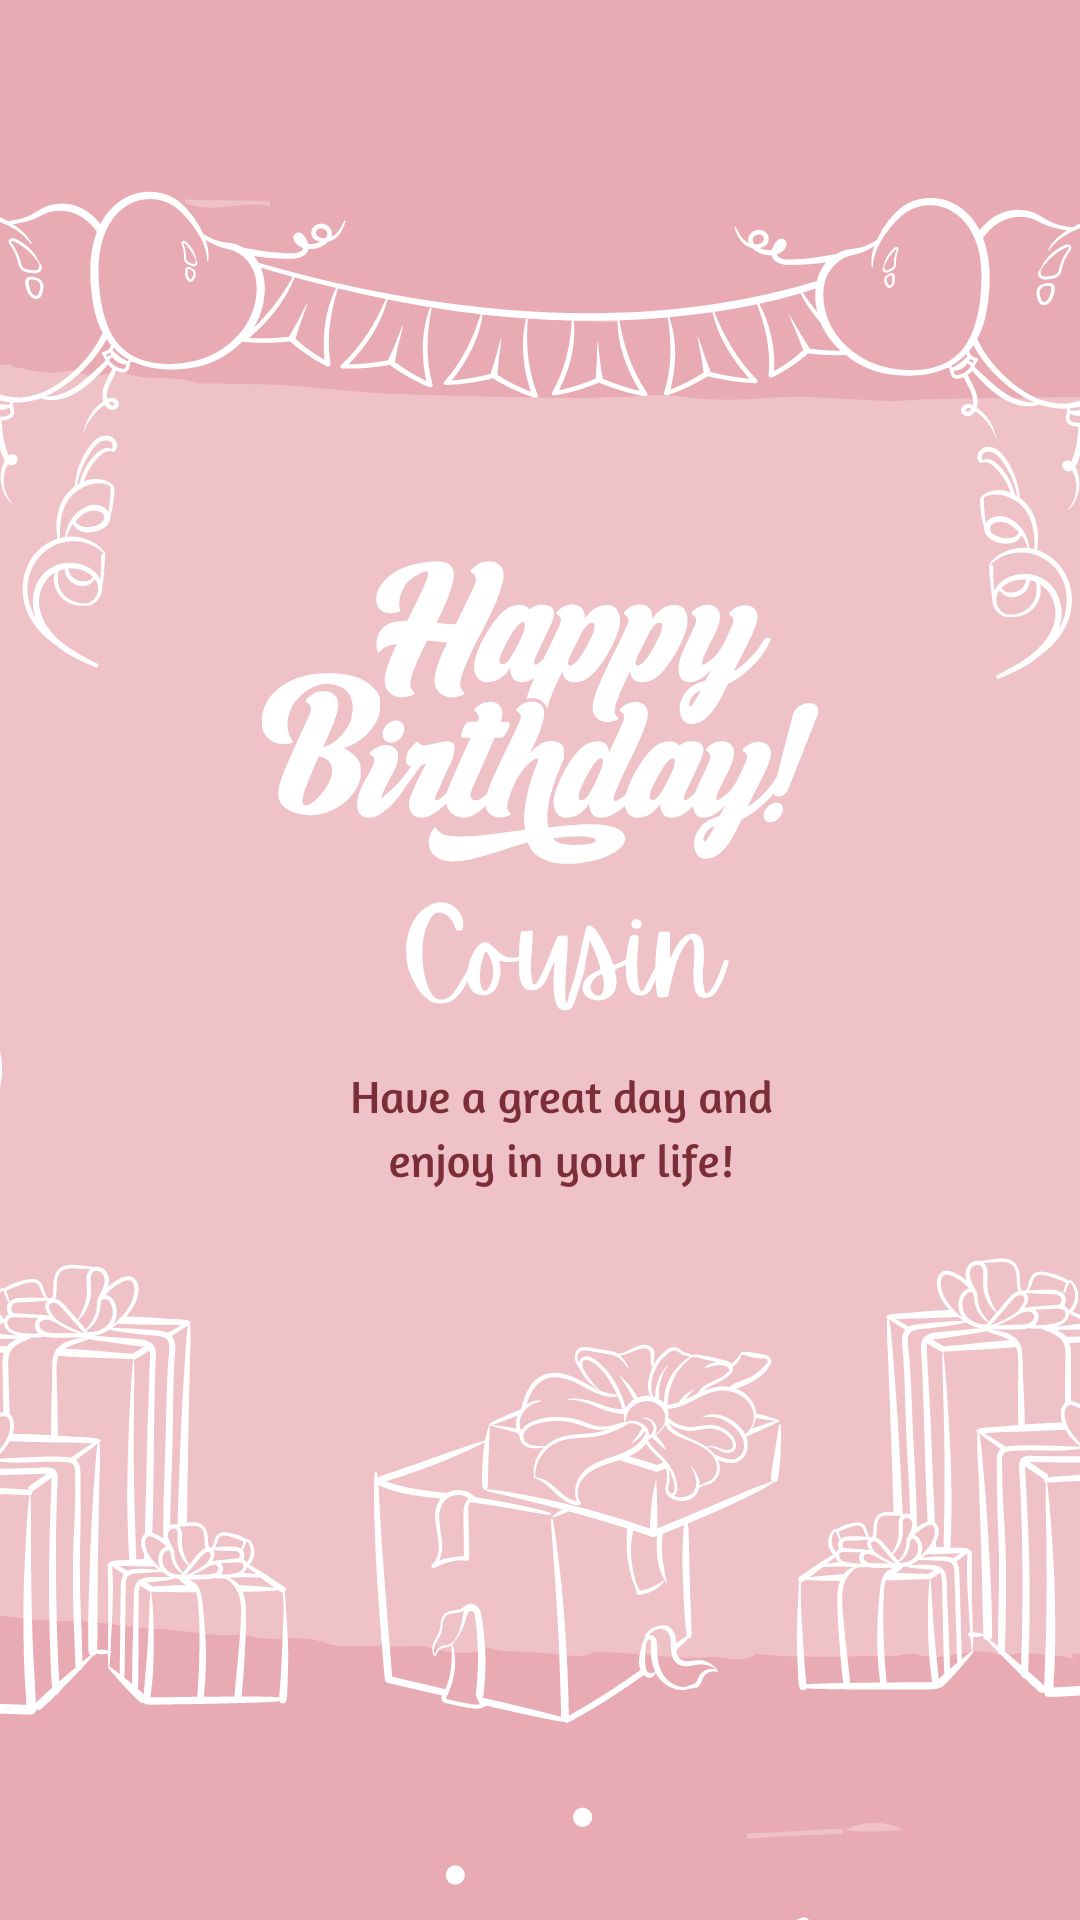 birthday images cousin female pink party decoration